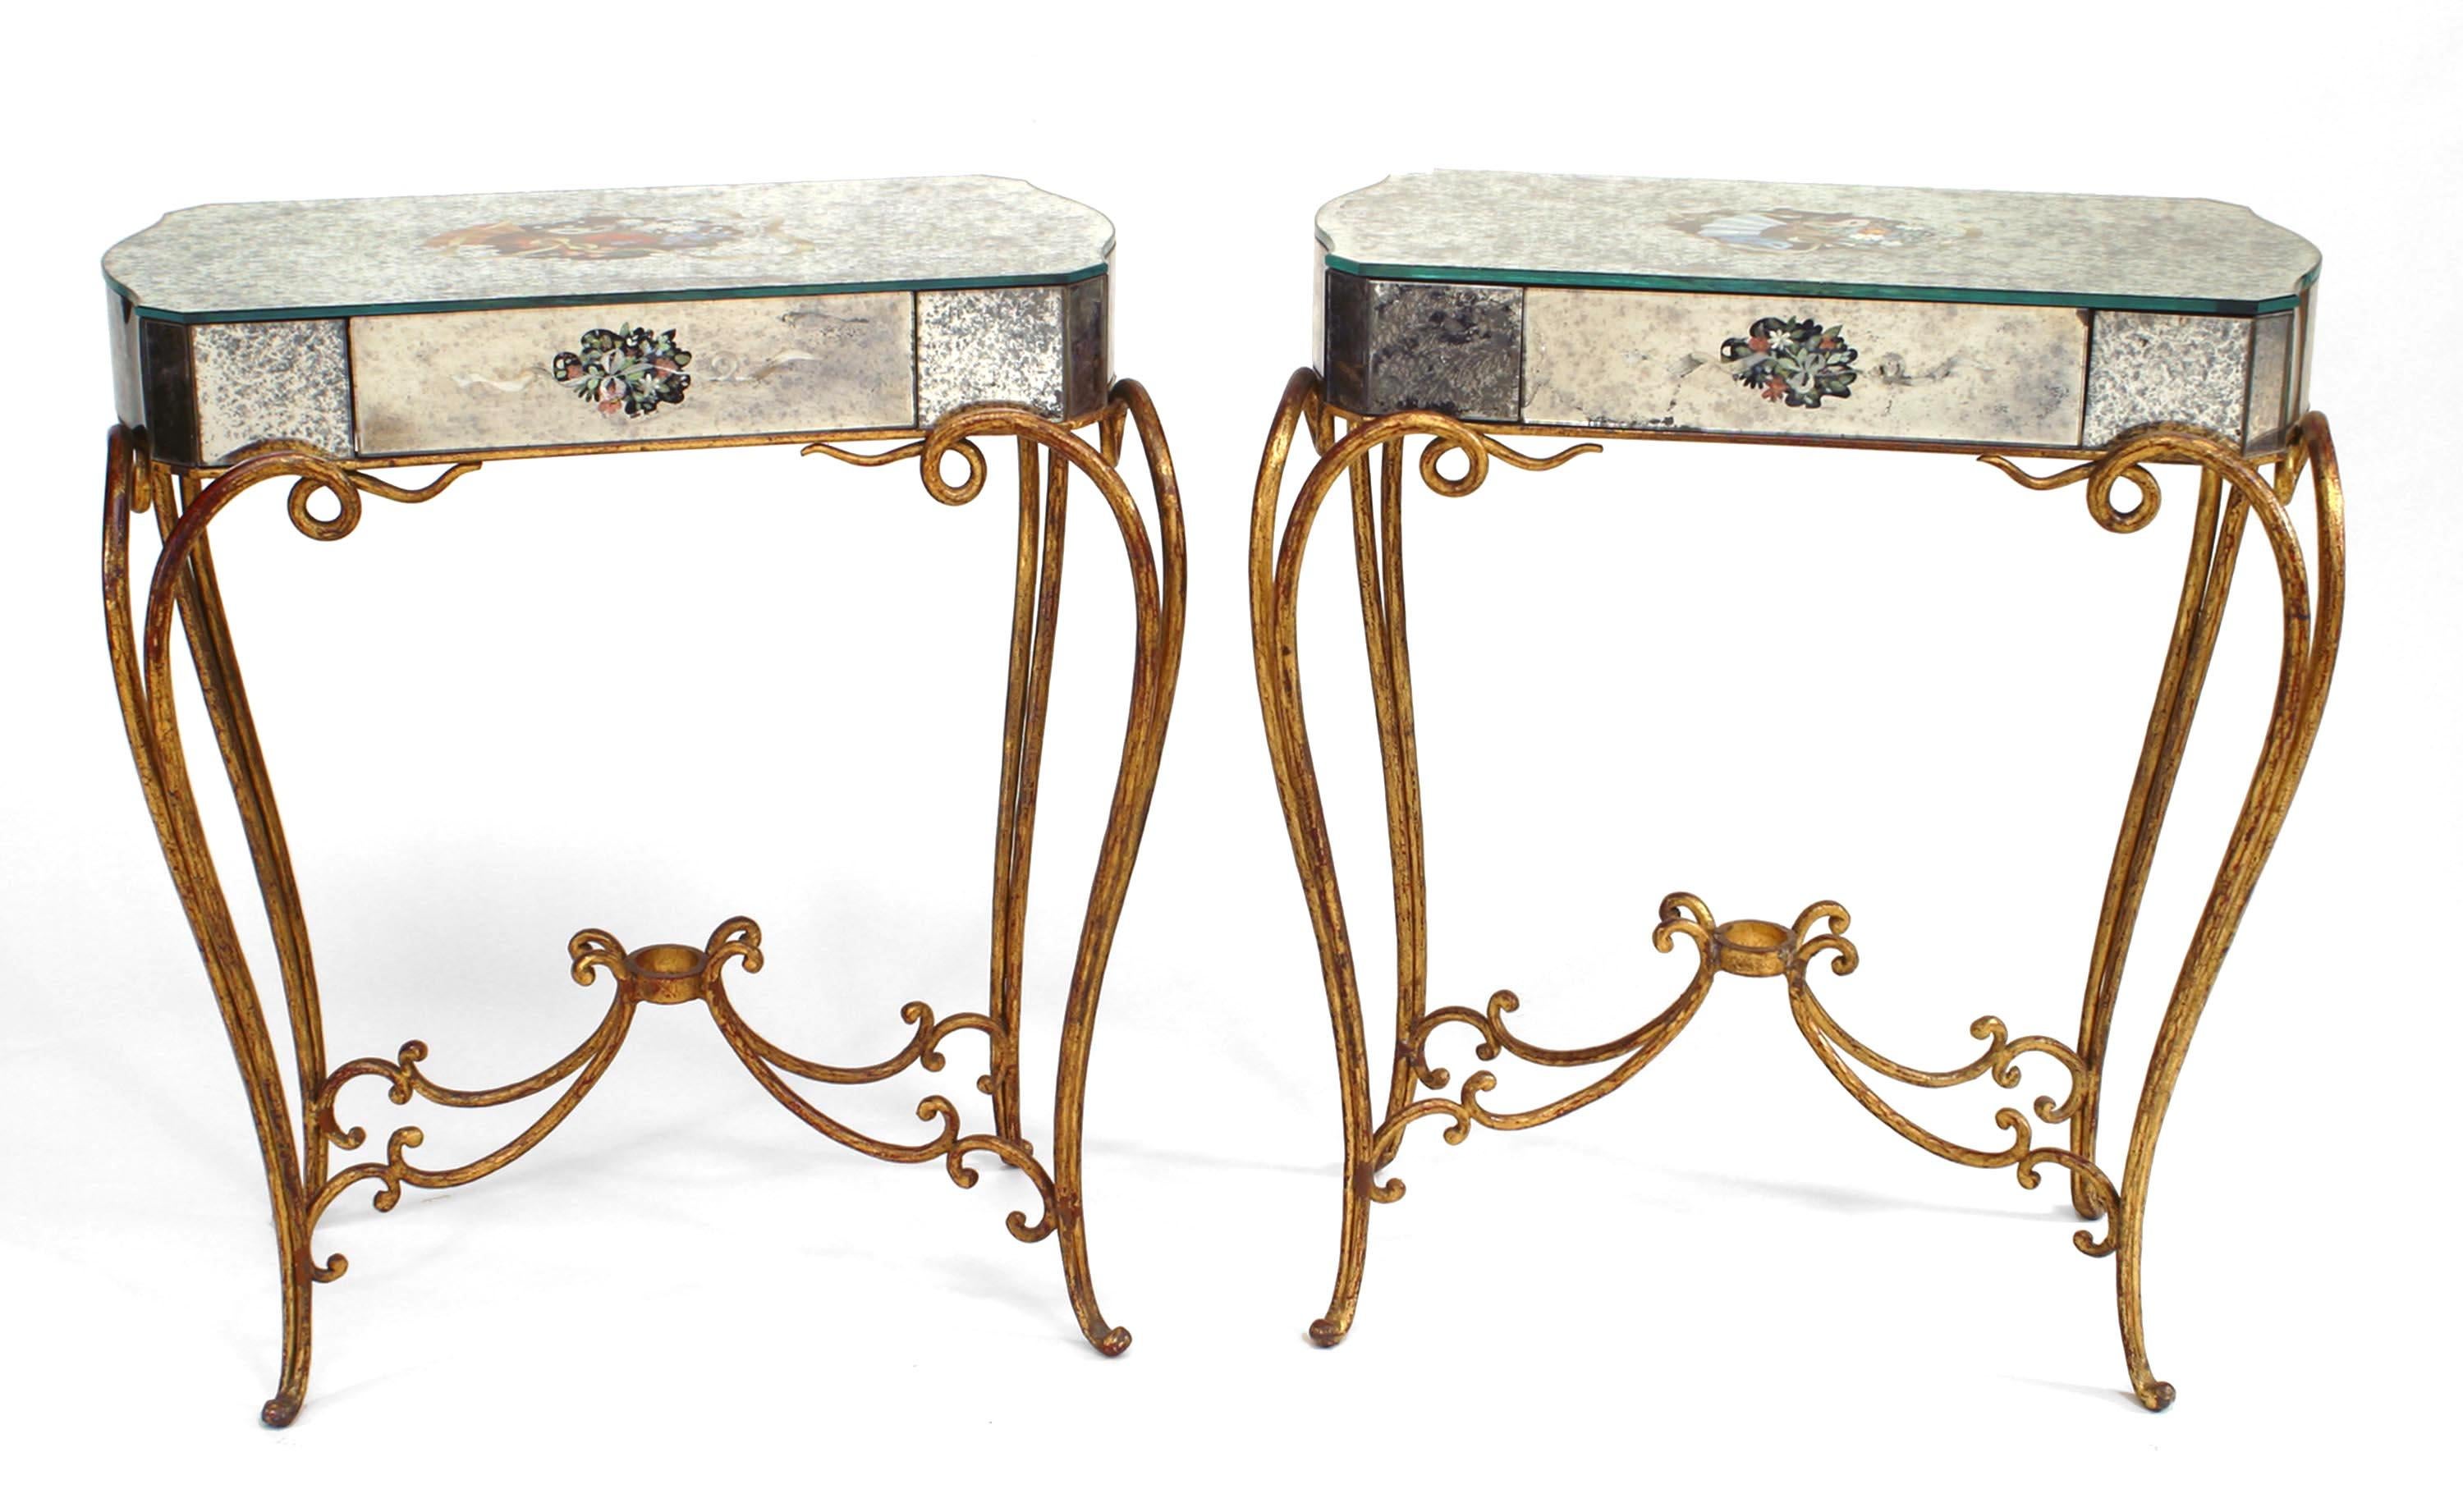 Pair of French Mid-Century (1940s) rectangular mirrored decorated end tables with drawer and gilt scroll legs and stretcher. (Attributed to RENE DROUET/mirror decorated by ADRIEN EKMAN) (PRICED AS Pair)
